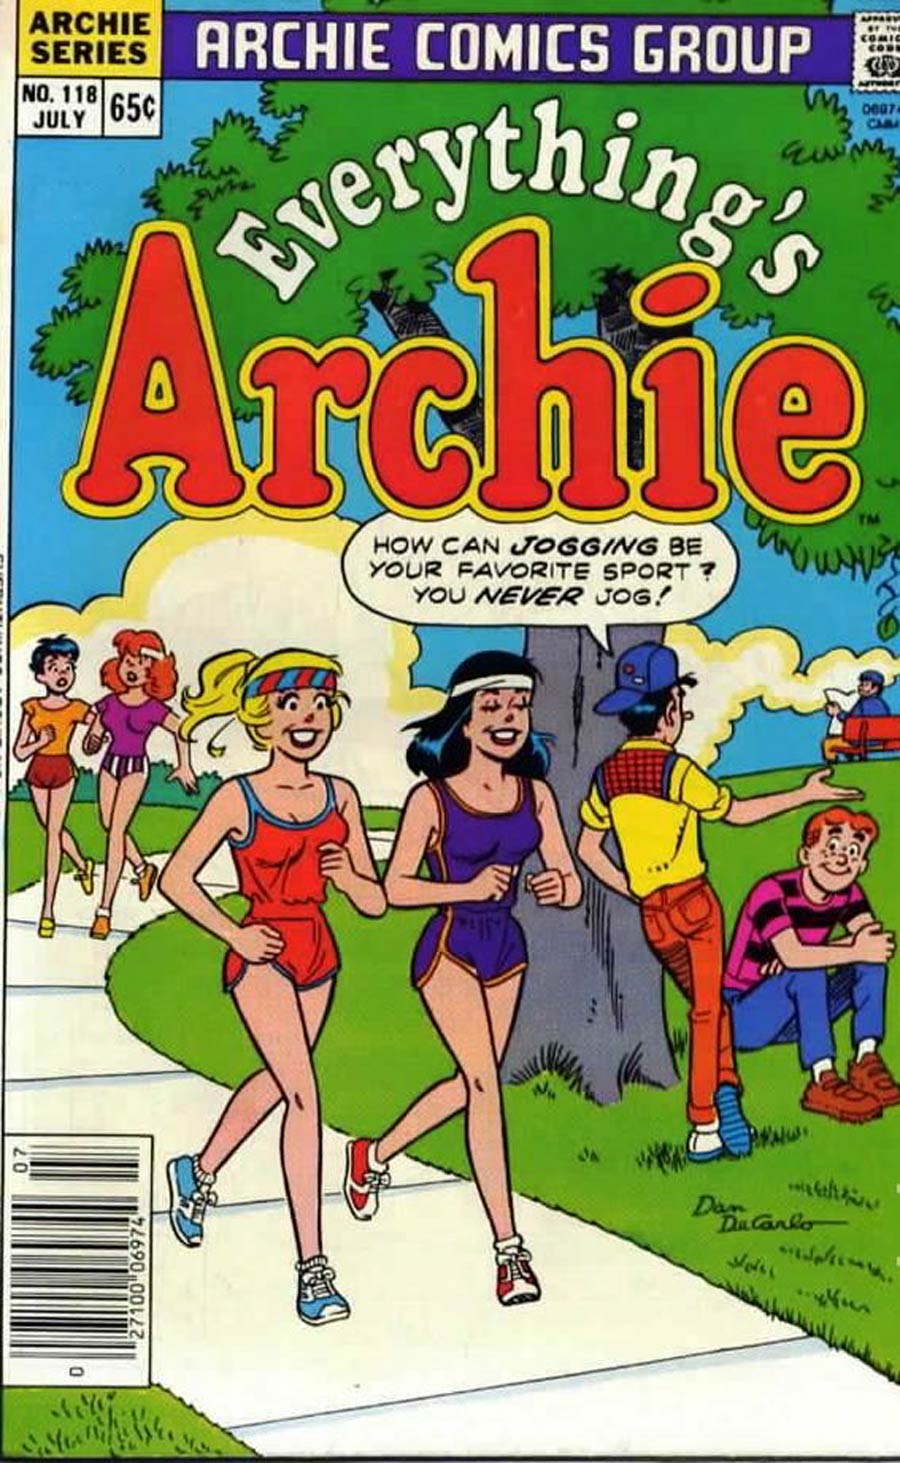 Everythings Archie #118